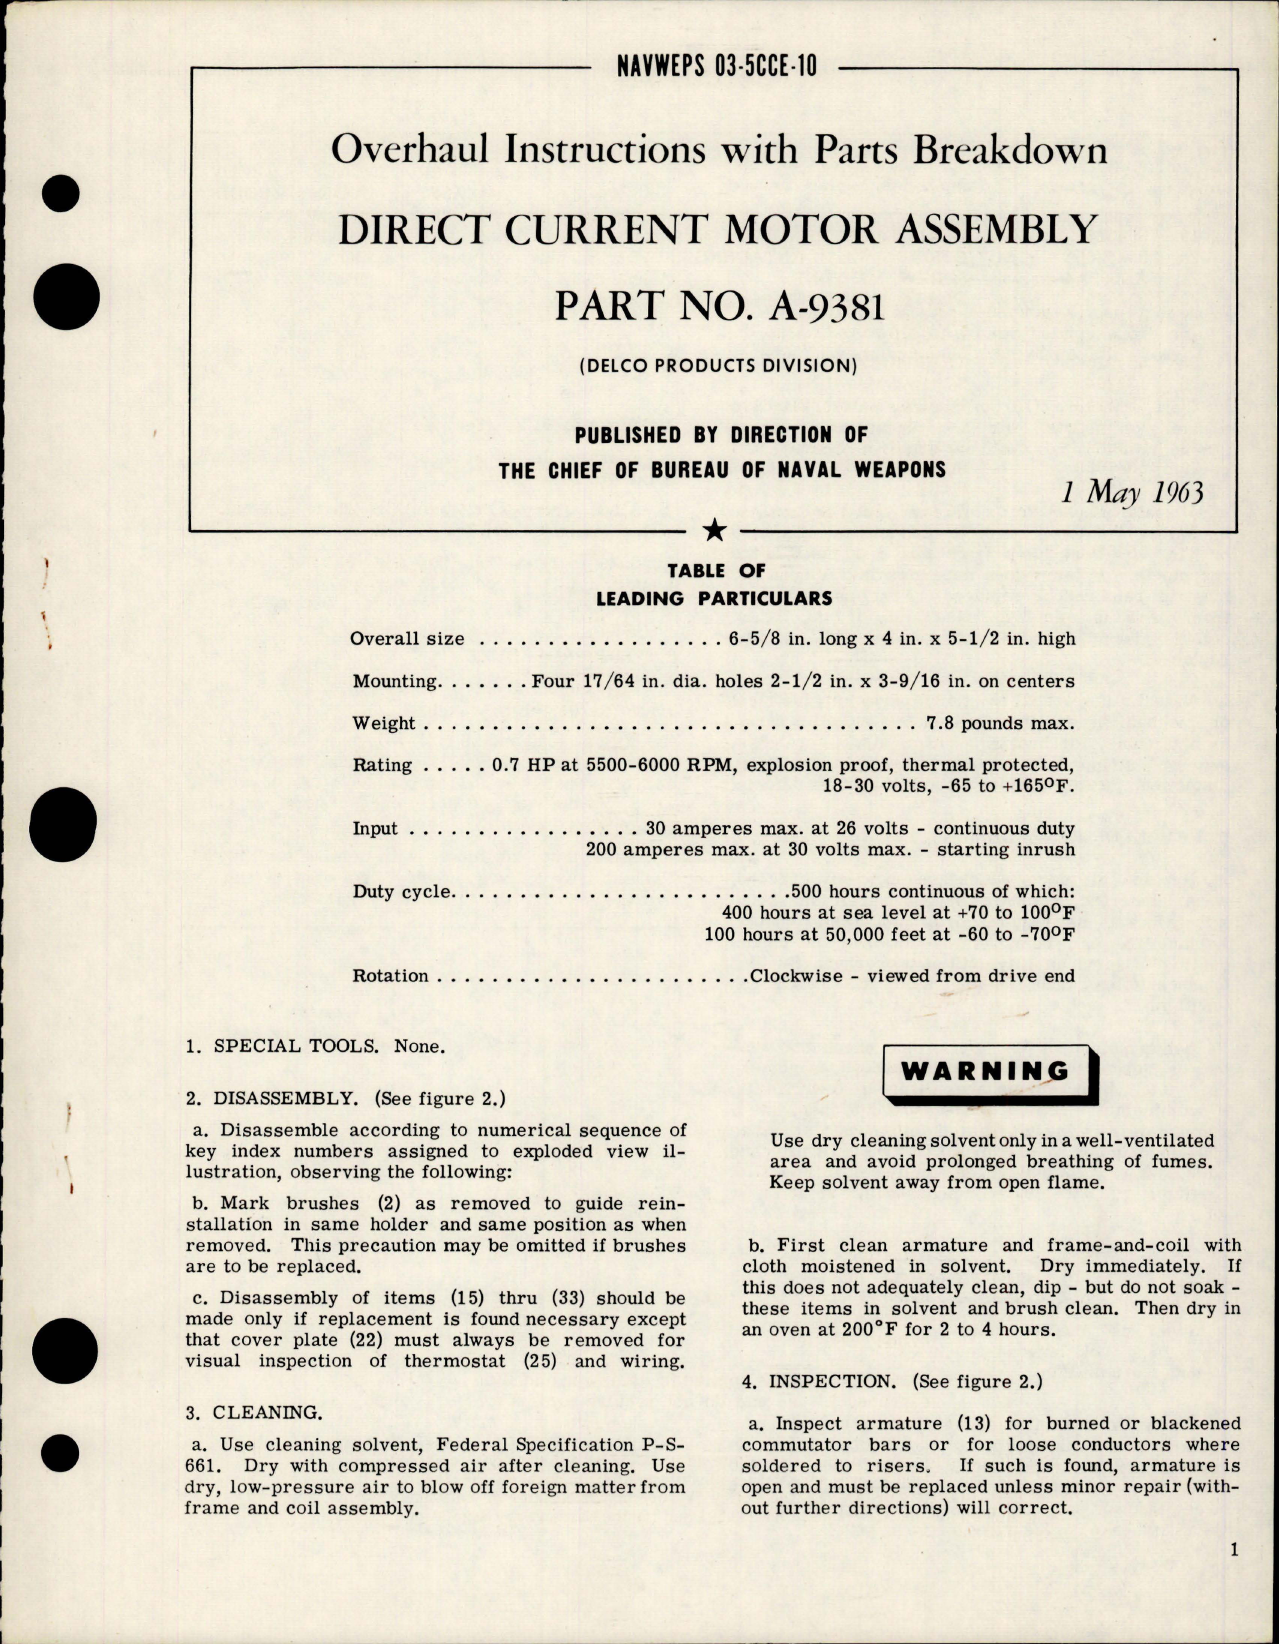 Sample page 1 from AirCorps Library document: Overhaul Instructions with Parts Breakdown for Direct Current Motor Assembly - Part A-9381